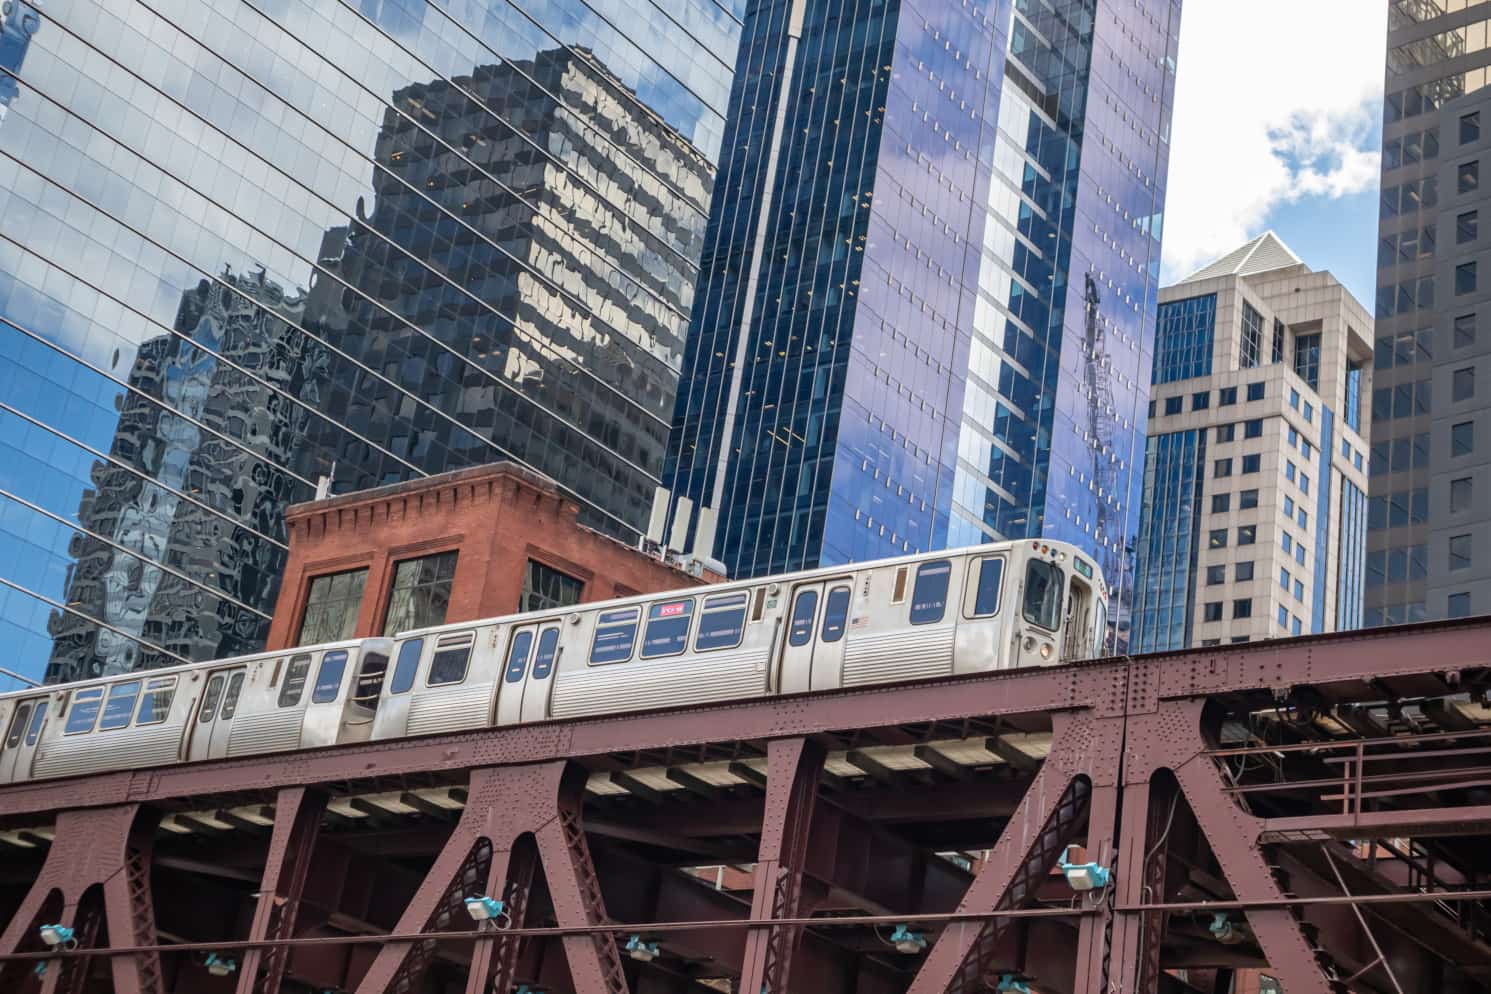 Chicago's iconic "L" train running on elevated tracks surrounded by skyscrapers in downtown Chicago